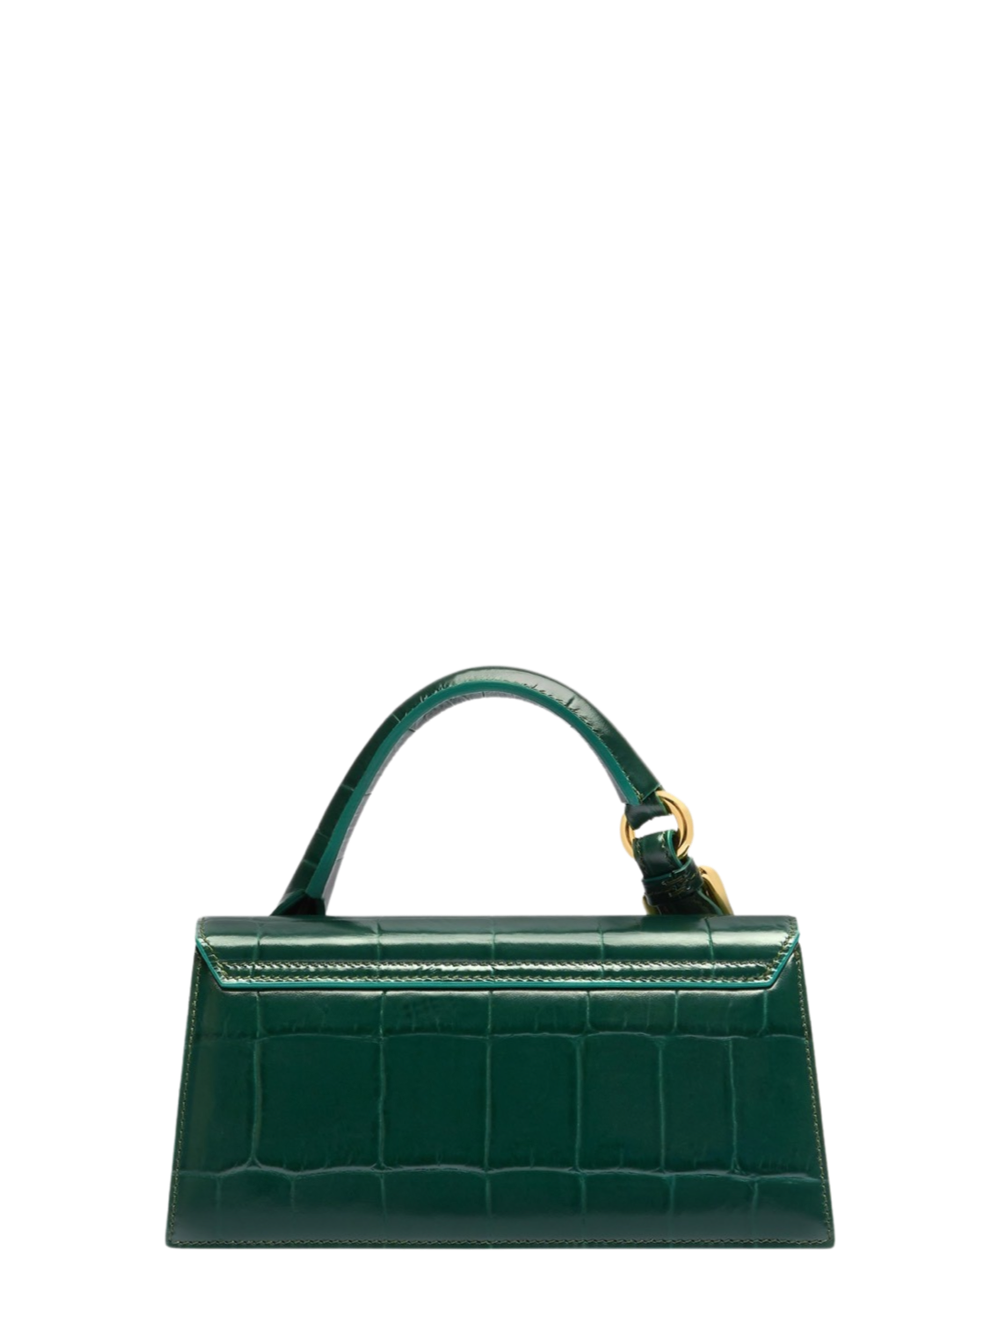 Jacquemus Le Chiquito Long Boucle in Dark Green